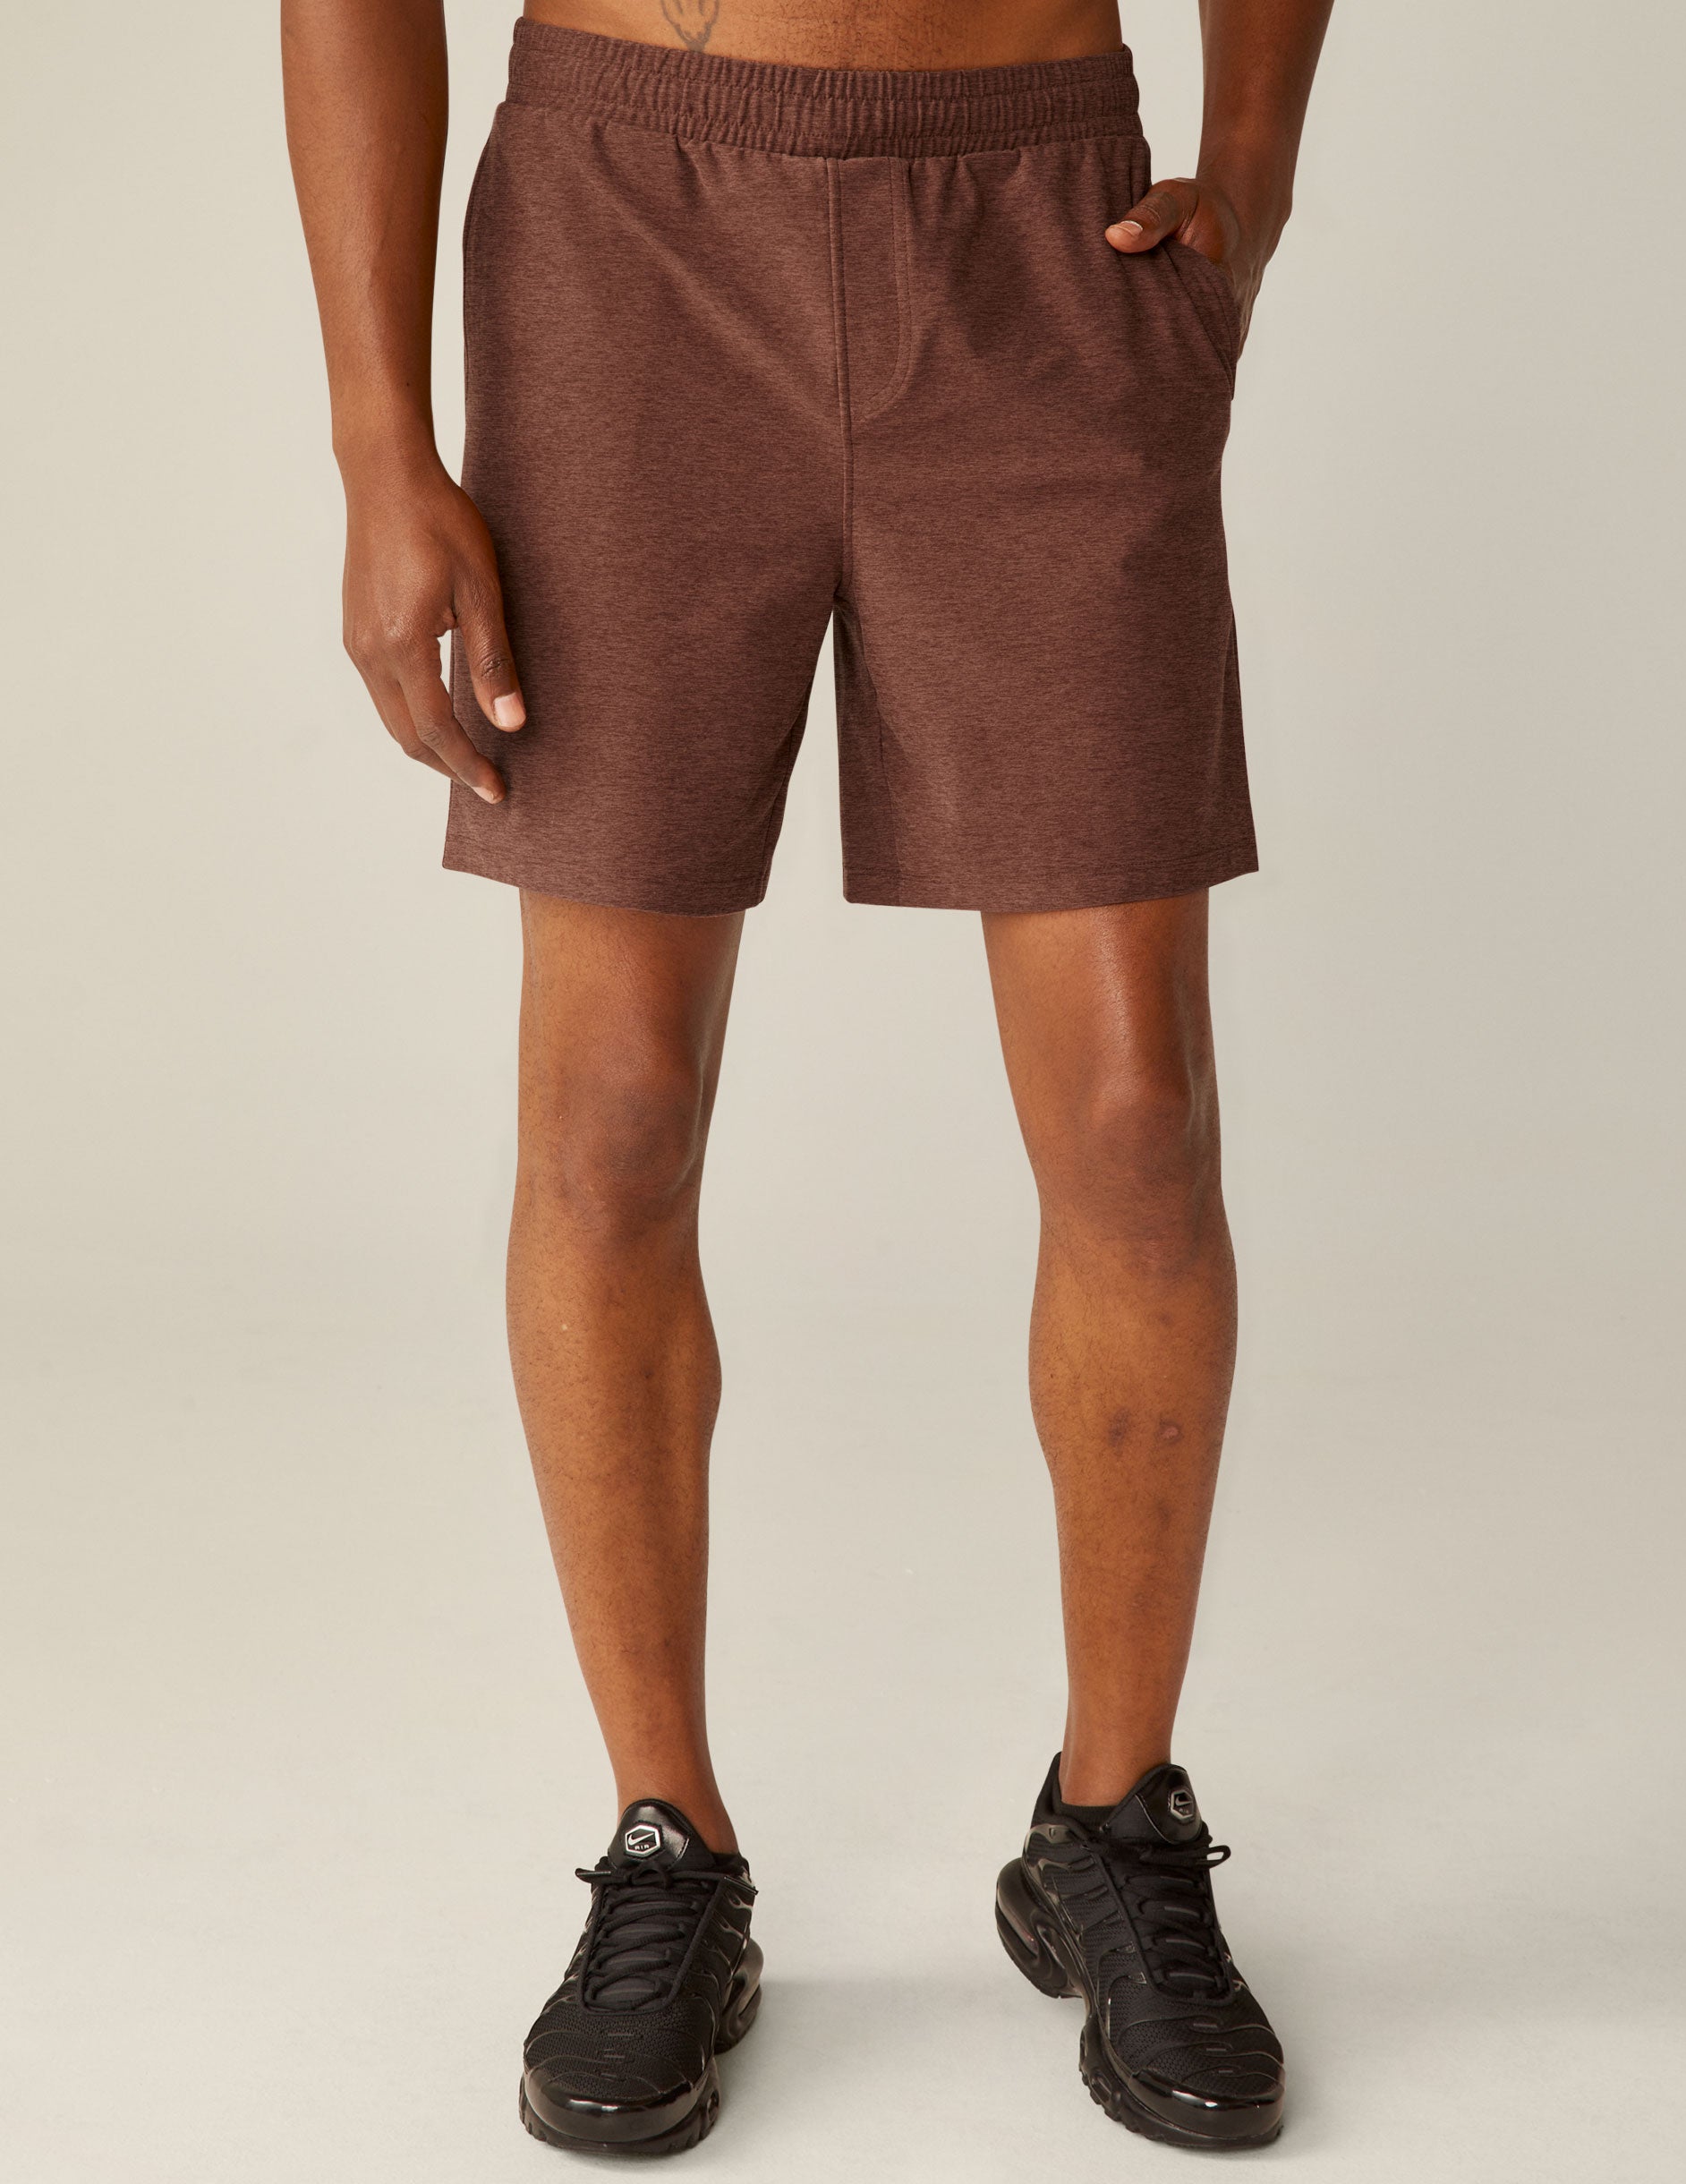 brown men's shorts with front pockets and a back pocket. 